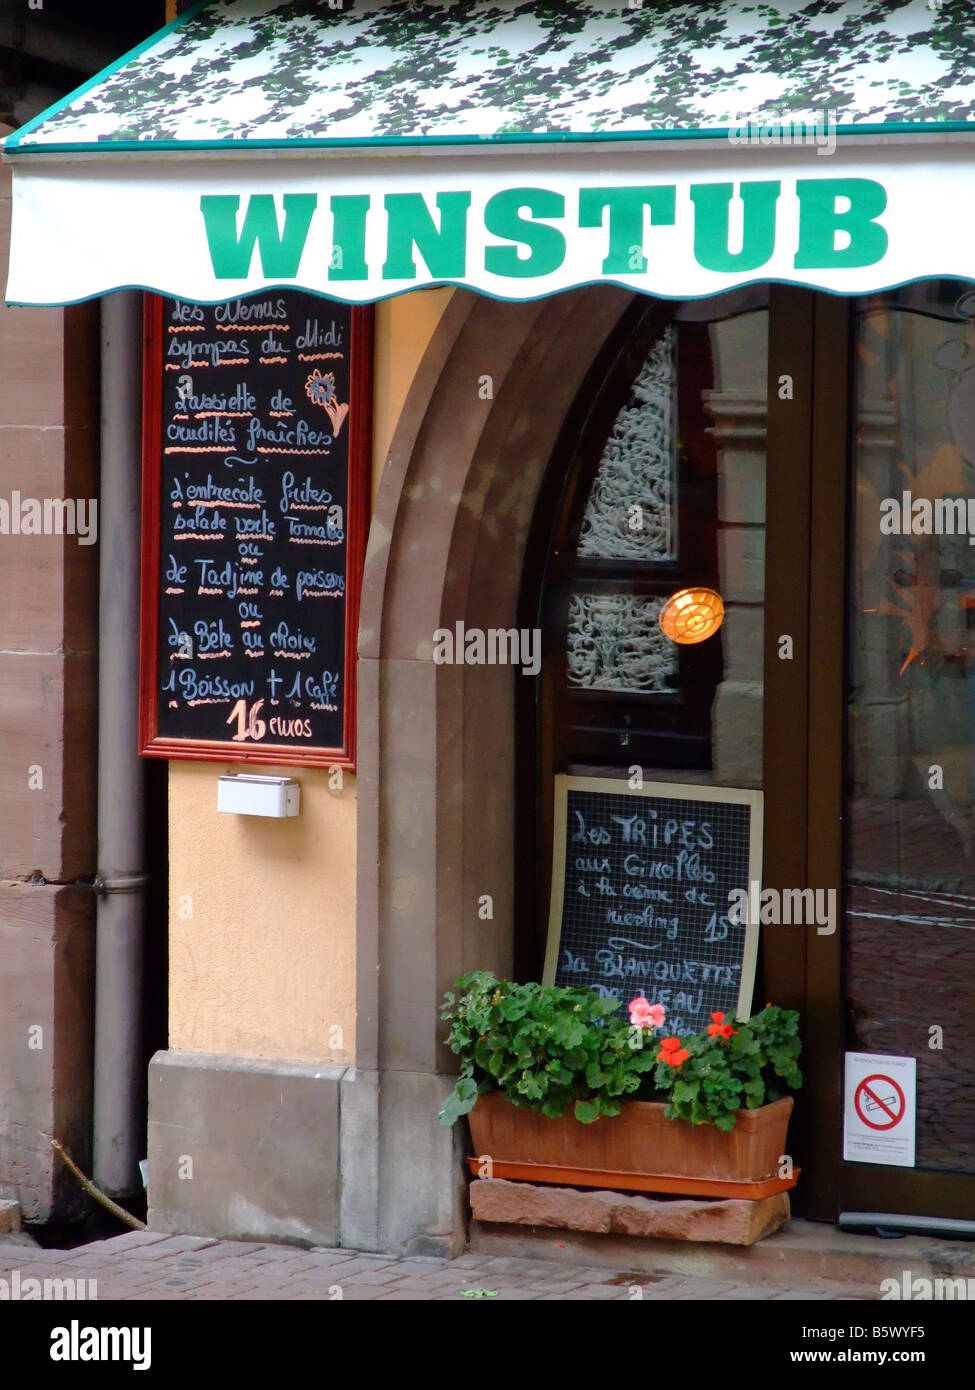 A winstub a wine bar and also a rural restaurant at Obernai – Alsace region - France Stock Photo